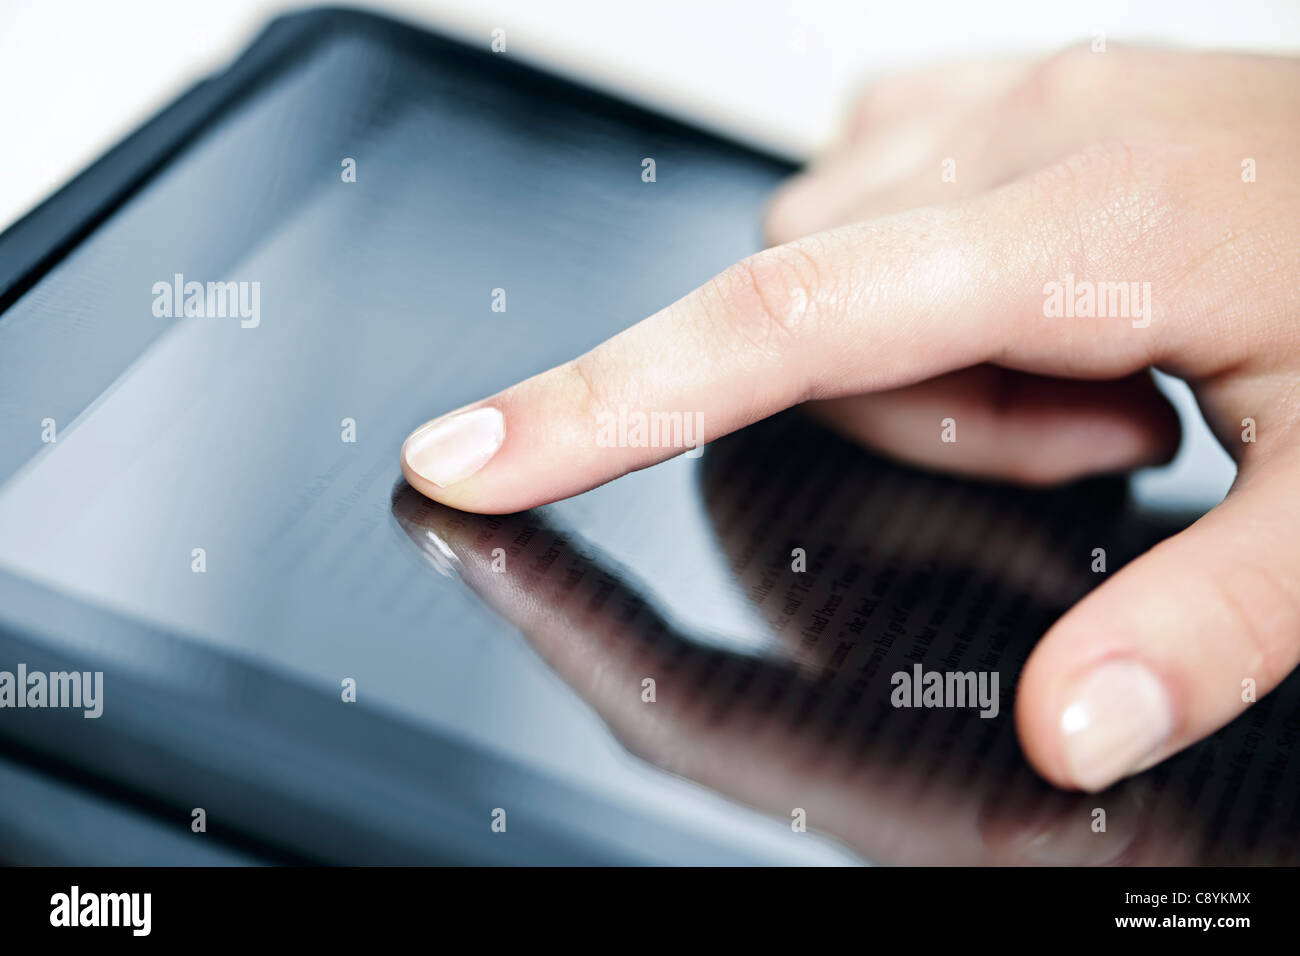 Female hand touching tablet computer screen with finger Stock Photo